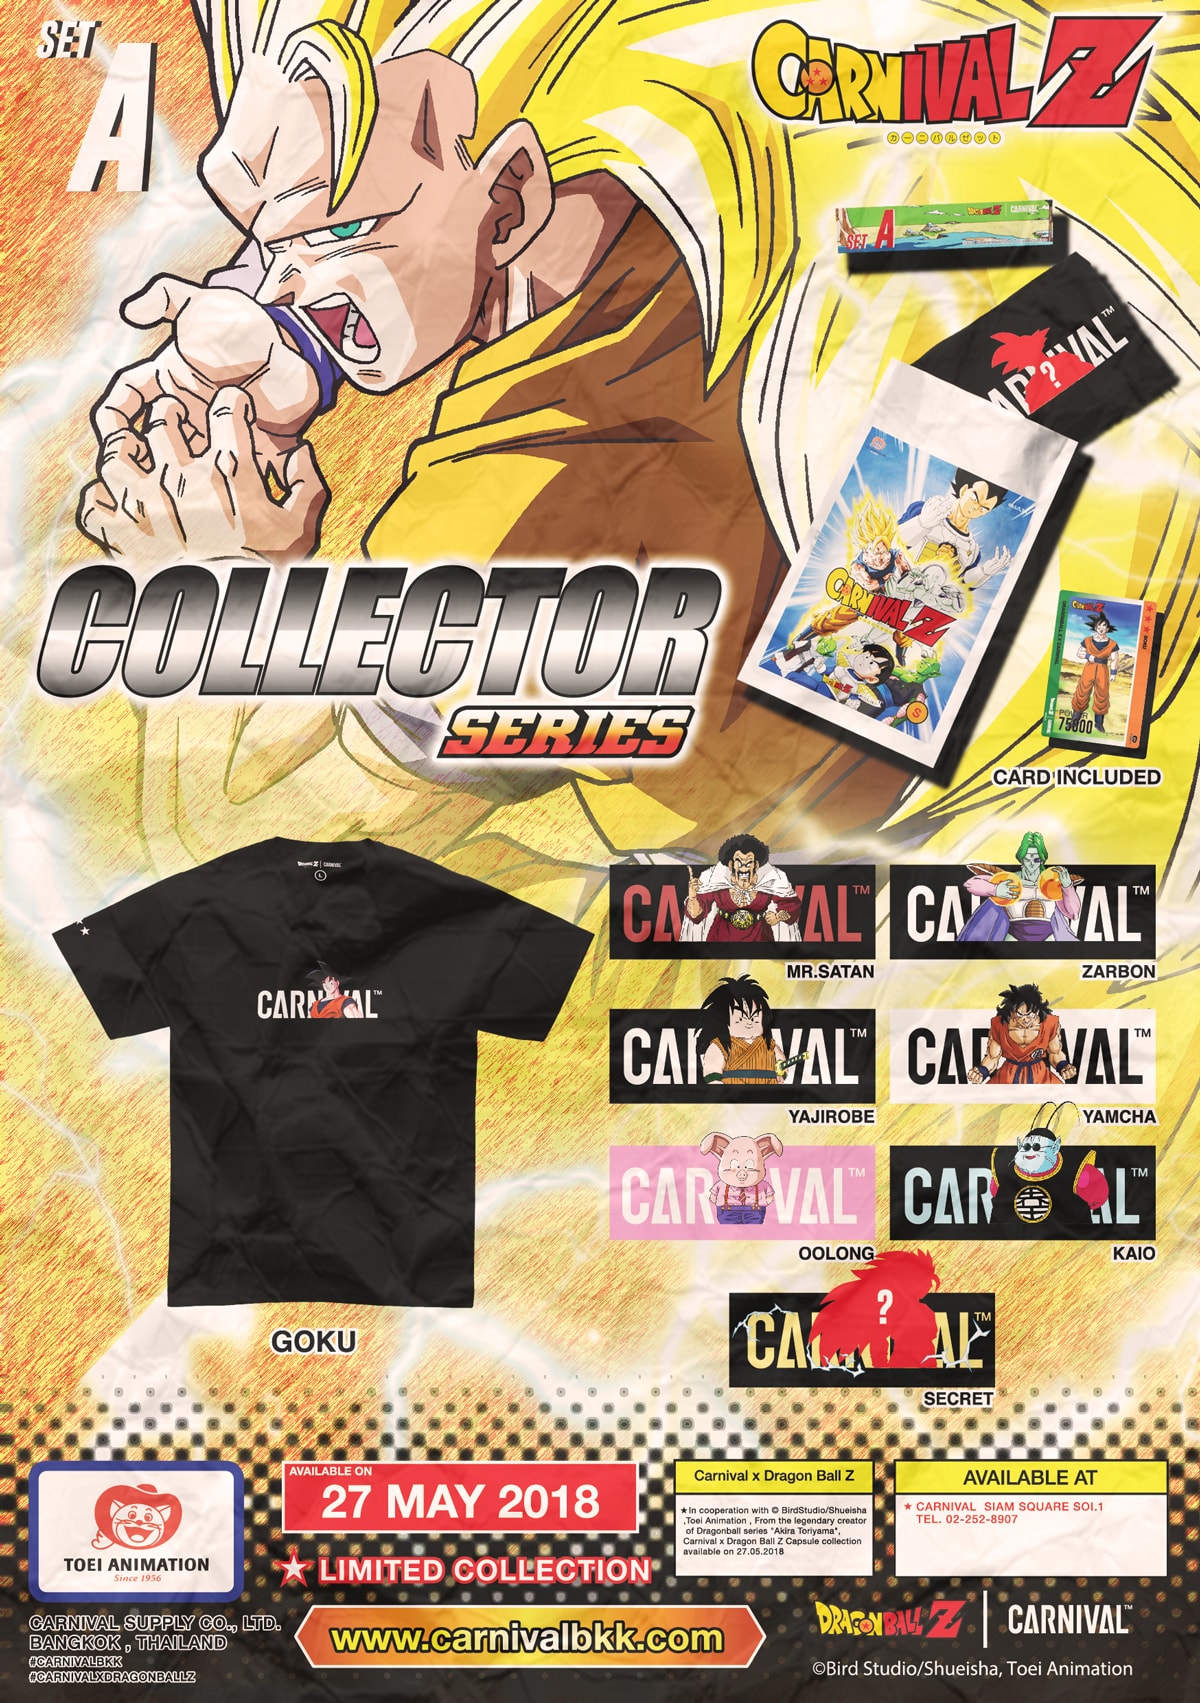 Dragon Ball Z CARNIVAL Collectors Capsule Collection Hoodie T-shirt Cap Hat Cushion Wrist Band Sticker Pack